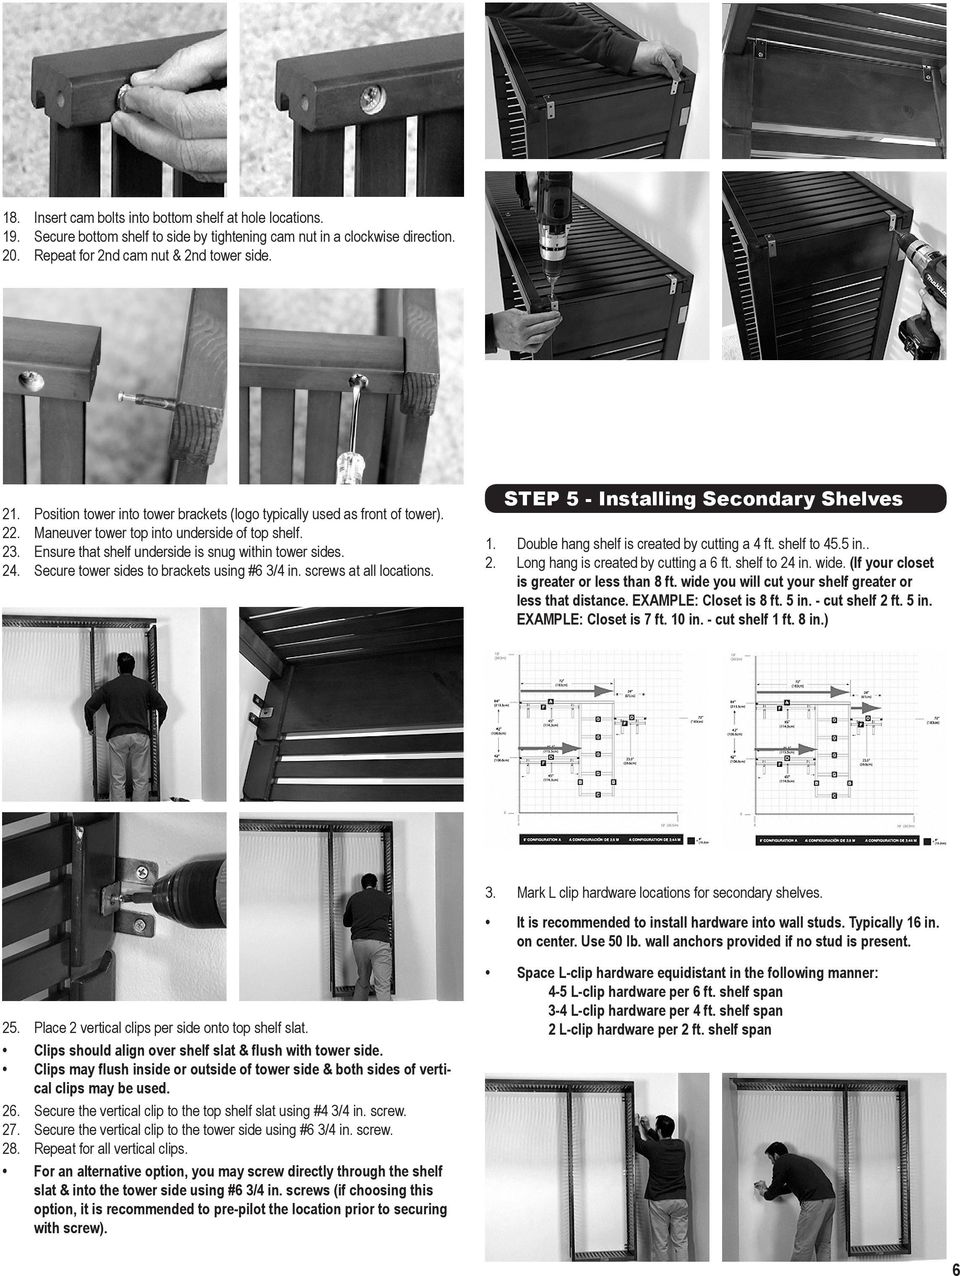 Secure tower sides to brackets using #6 3/4 in. screws at all locations. STEP 5 - Installing Secondary Shelves 1. Double hang shelf is created by cutting a 4 ft. shelf to 45.5 in.. 2.